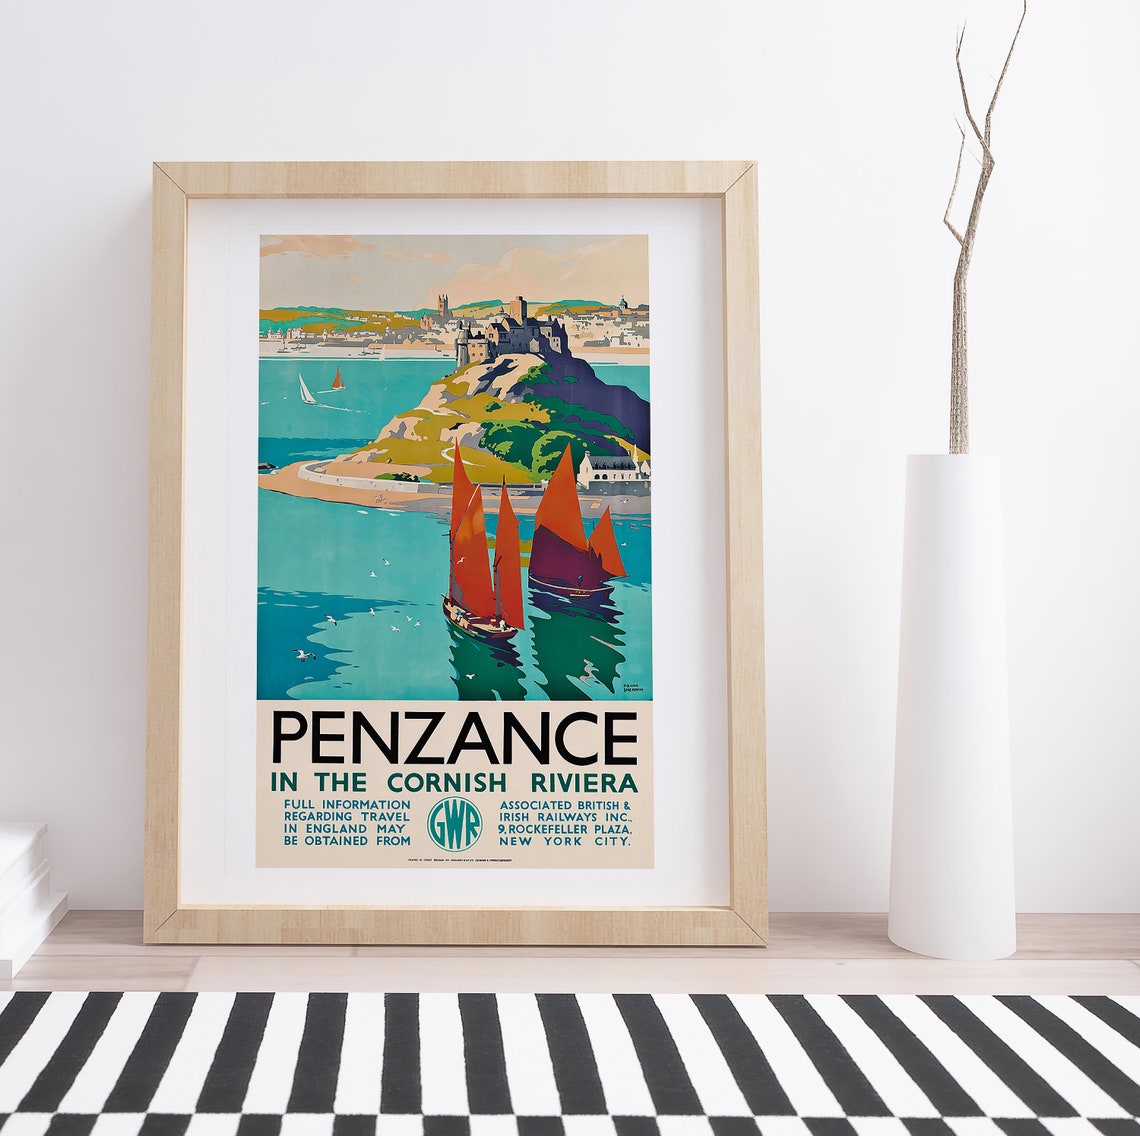 Penzance in the Cornish Riviera by Frank Sherwin Vintage | Etsy